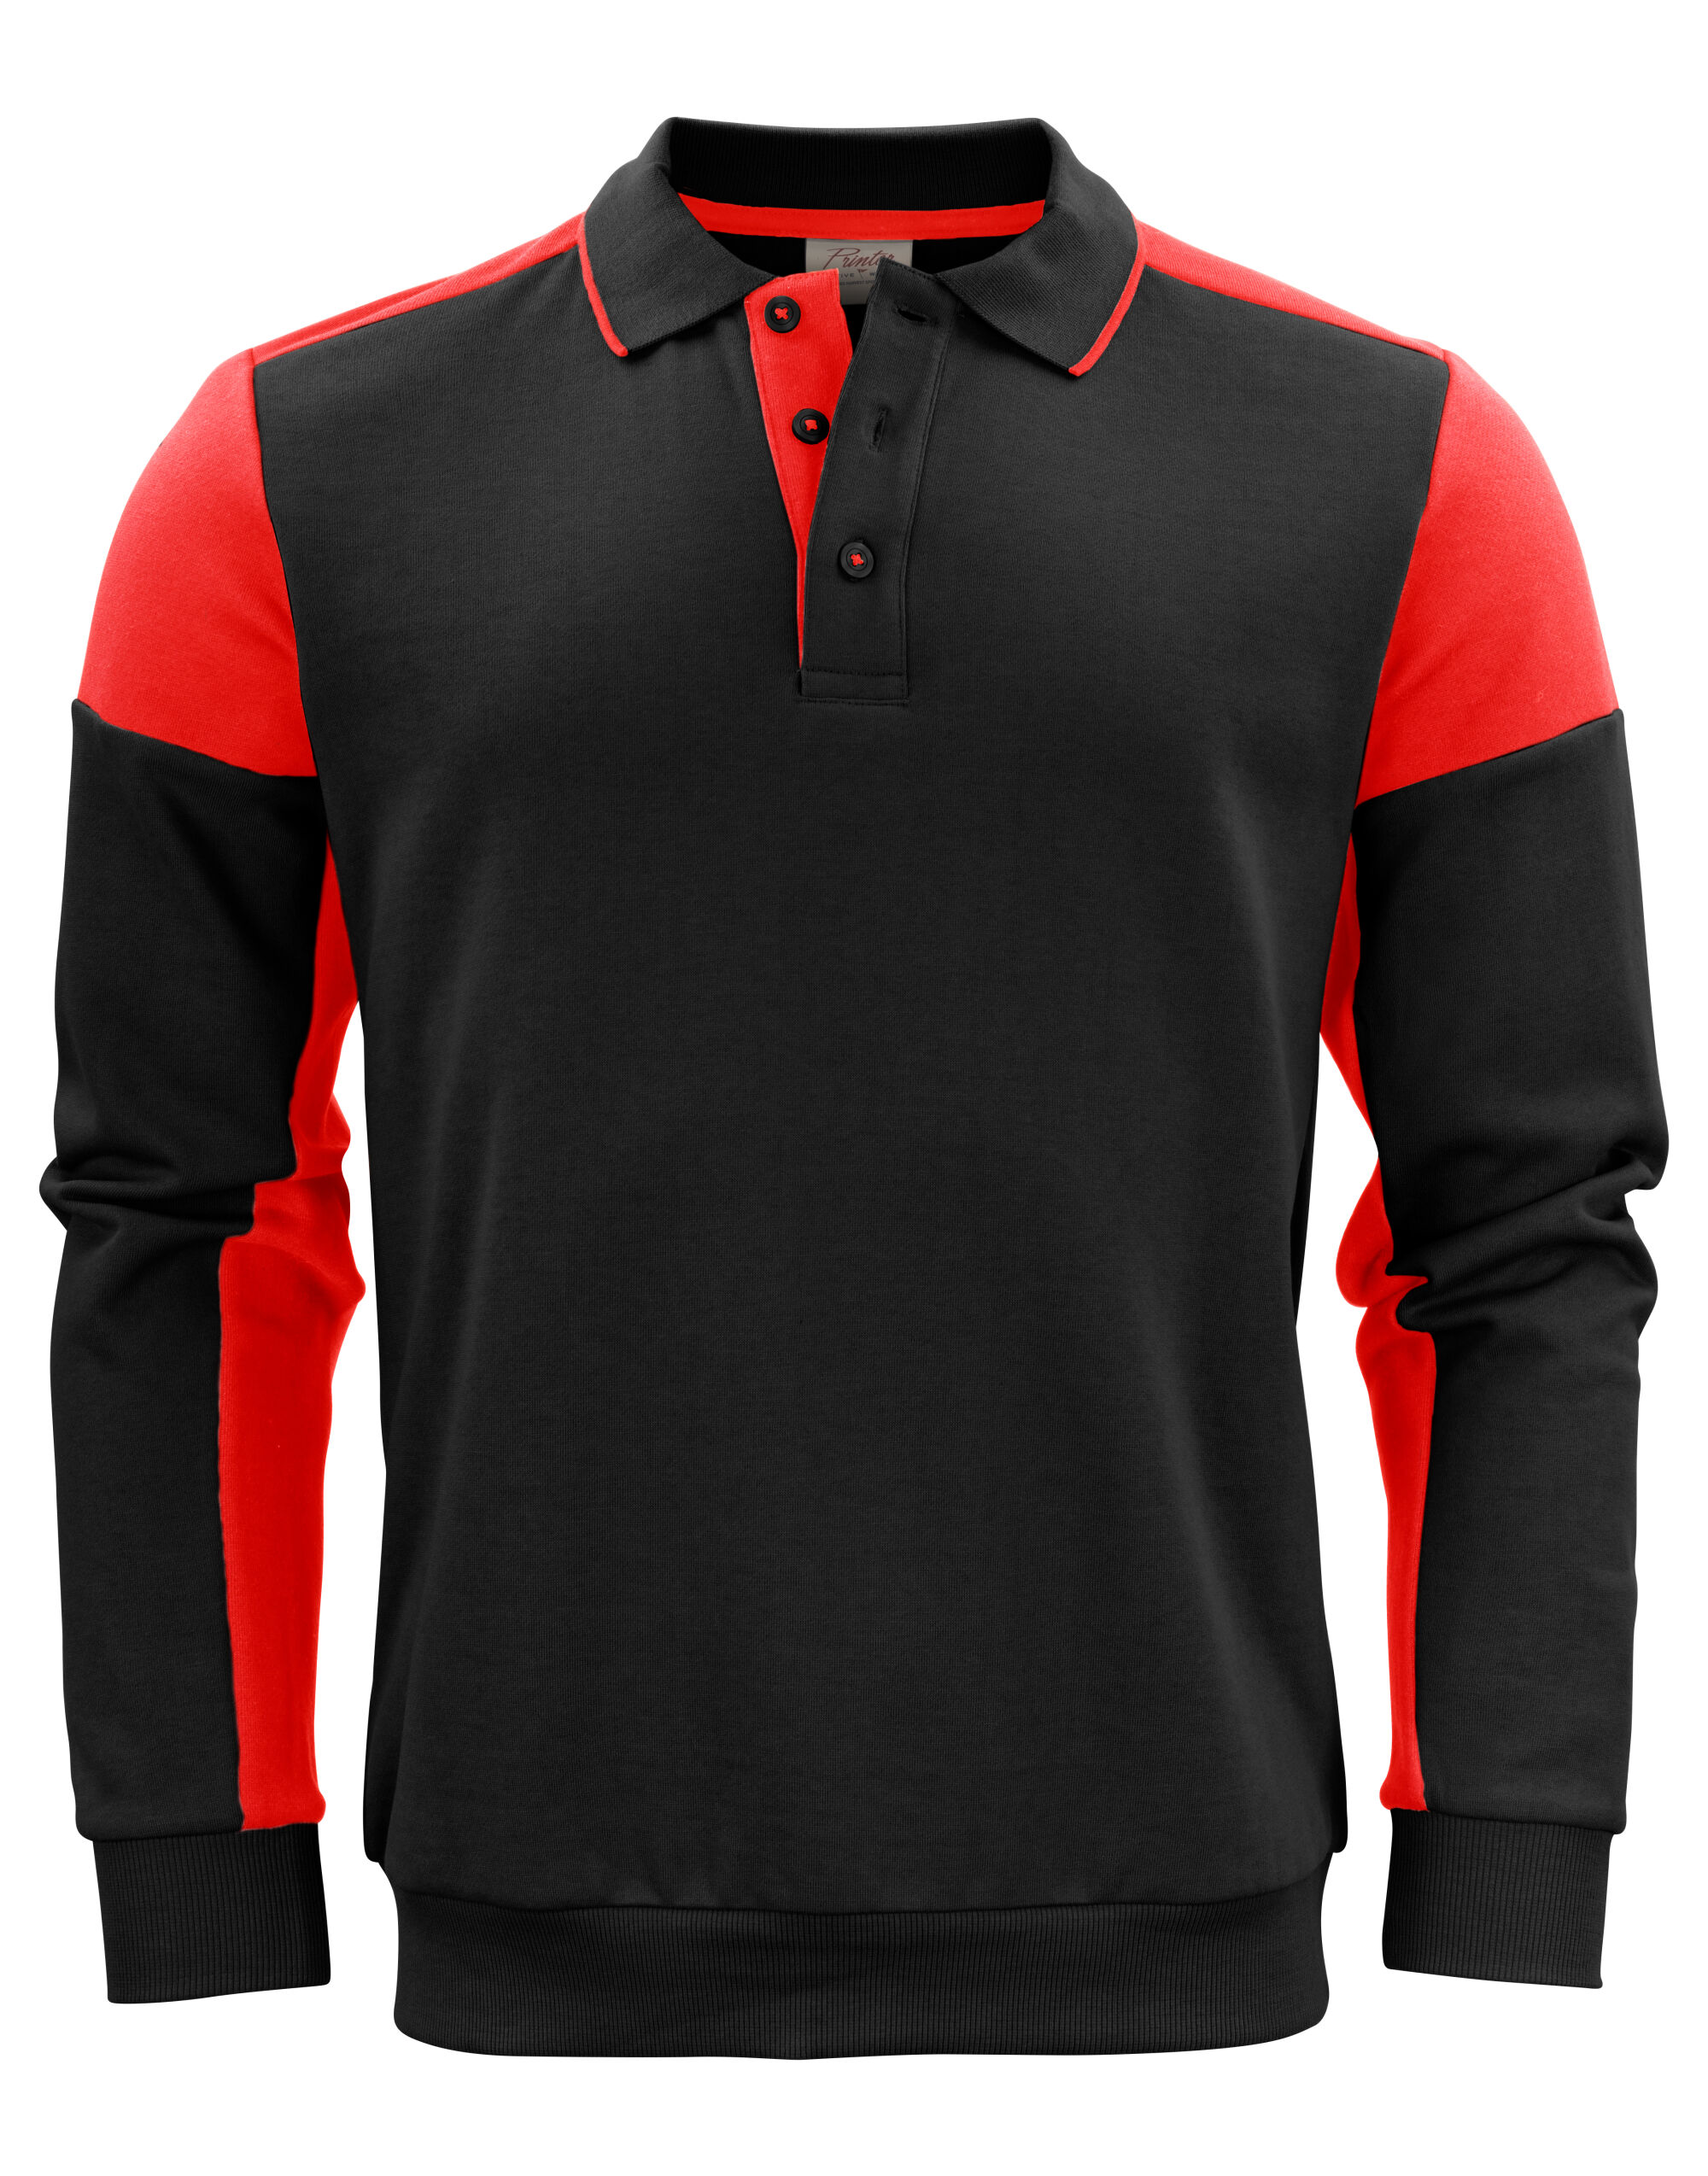 Printer_Prime_Polosweater_Black_Red_FRONT_2262060_165968